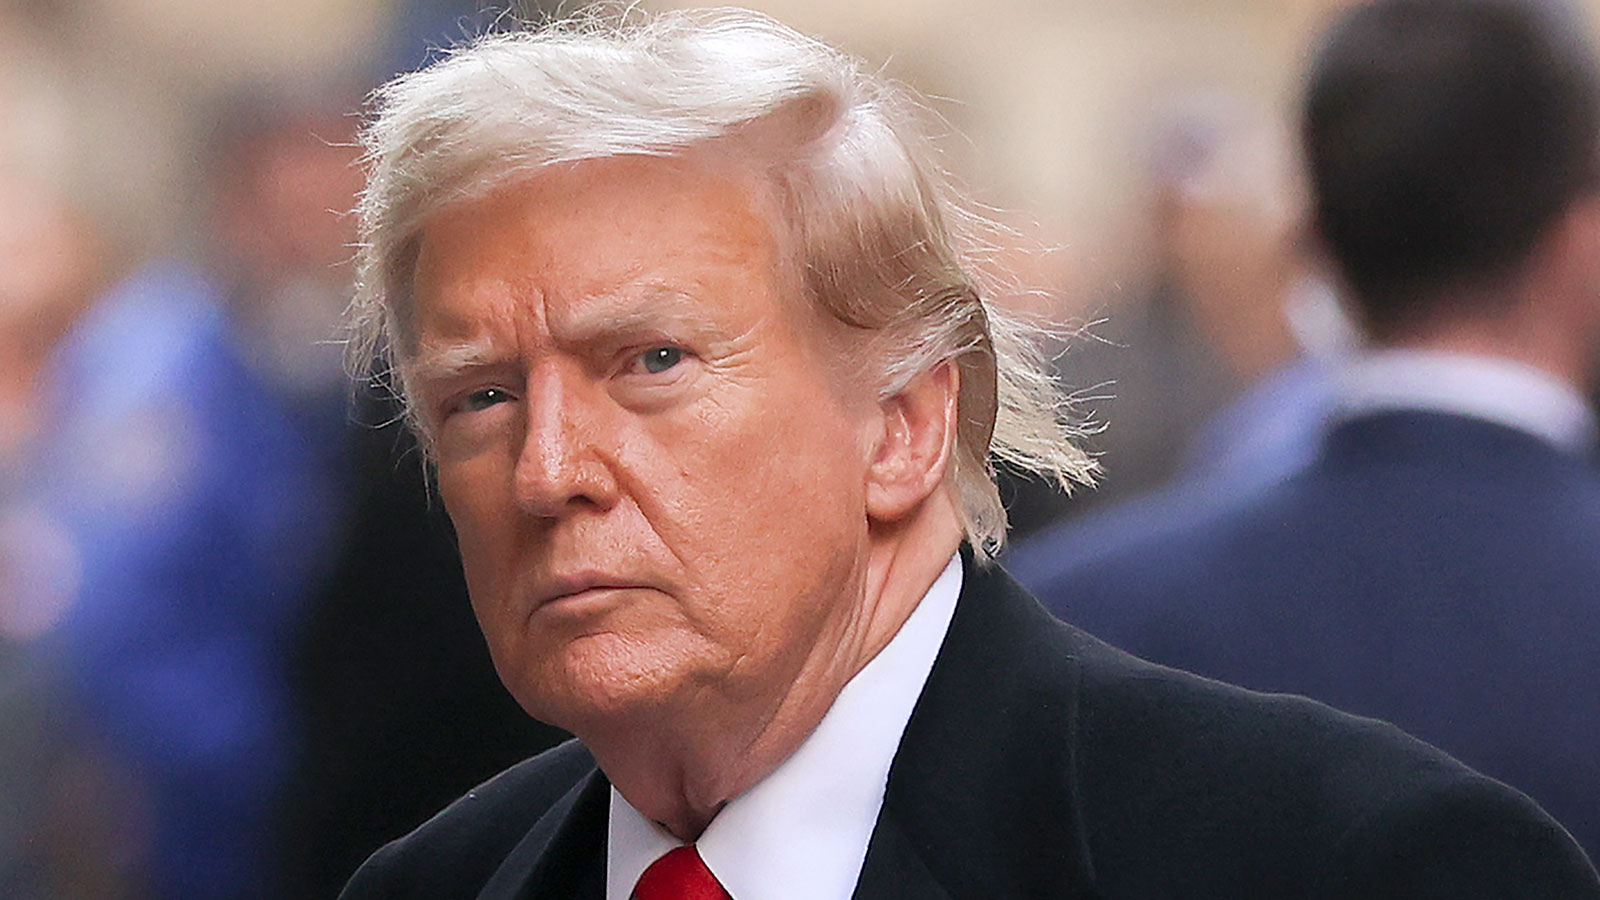 Former President Donald Trump arrives for a press conference at 40 Wall Street after a pre-trial hearing at Manhattan criminal court, on Monday, March 25, in New York.